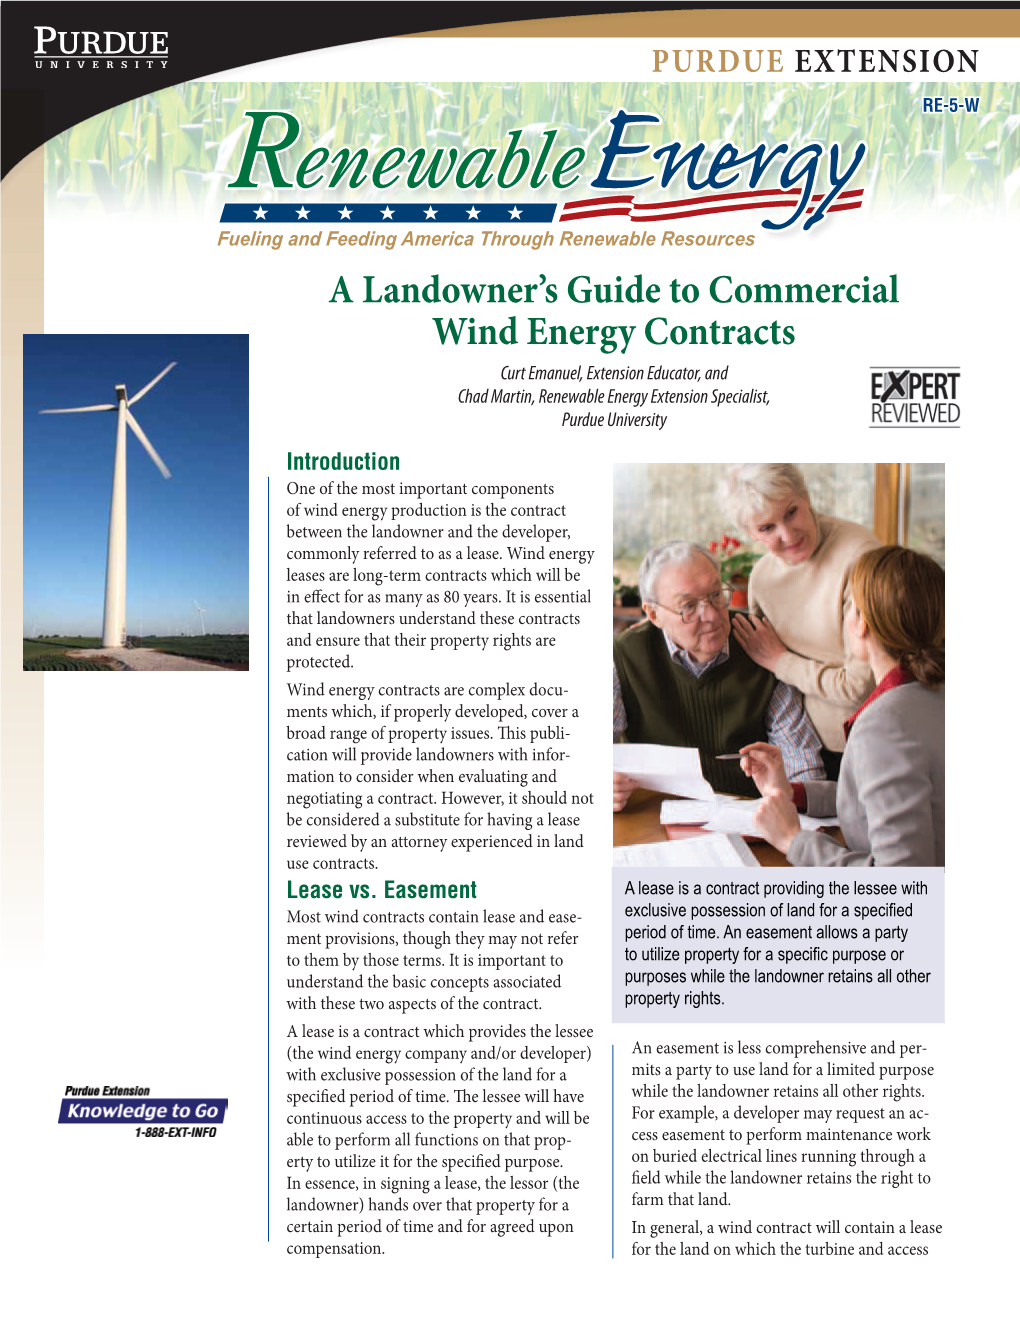 A Landowner's Guide to Commercial Wind Energy Contracts